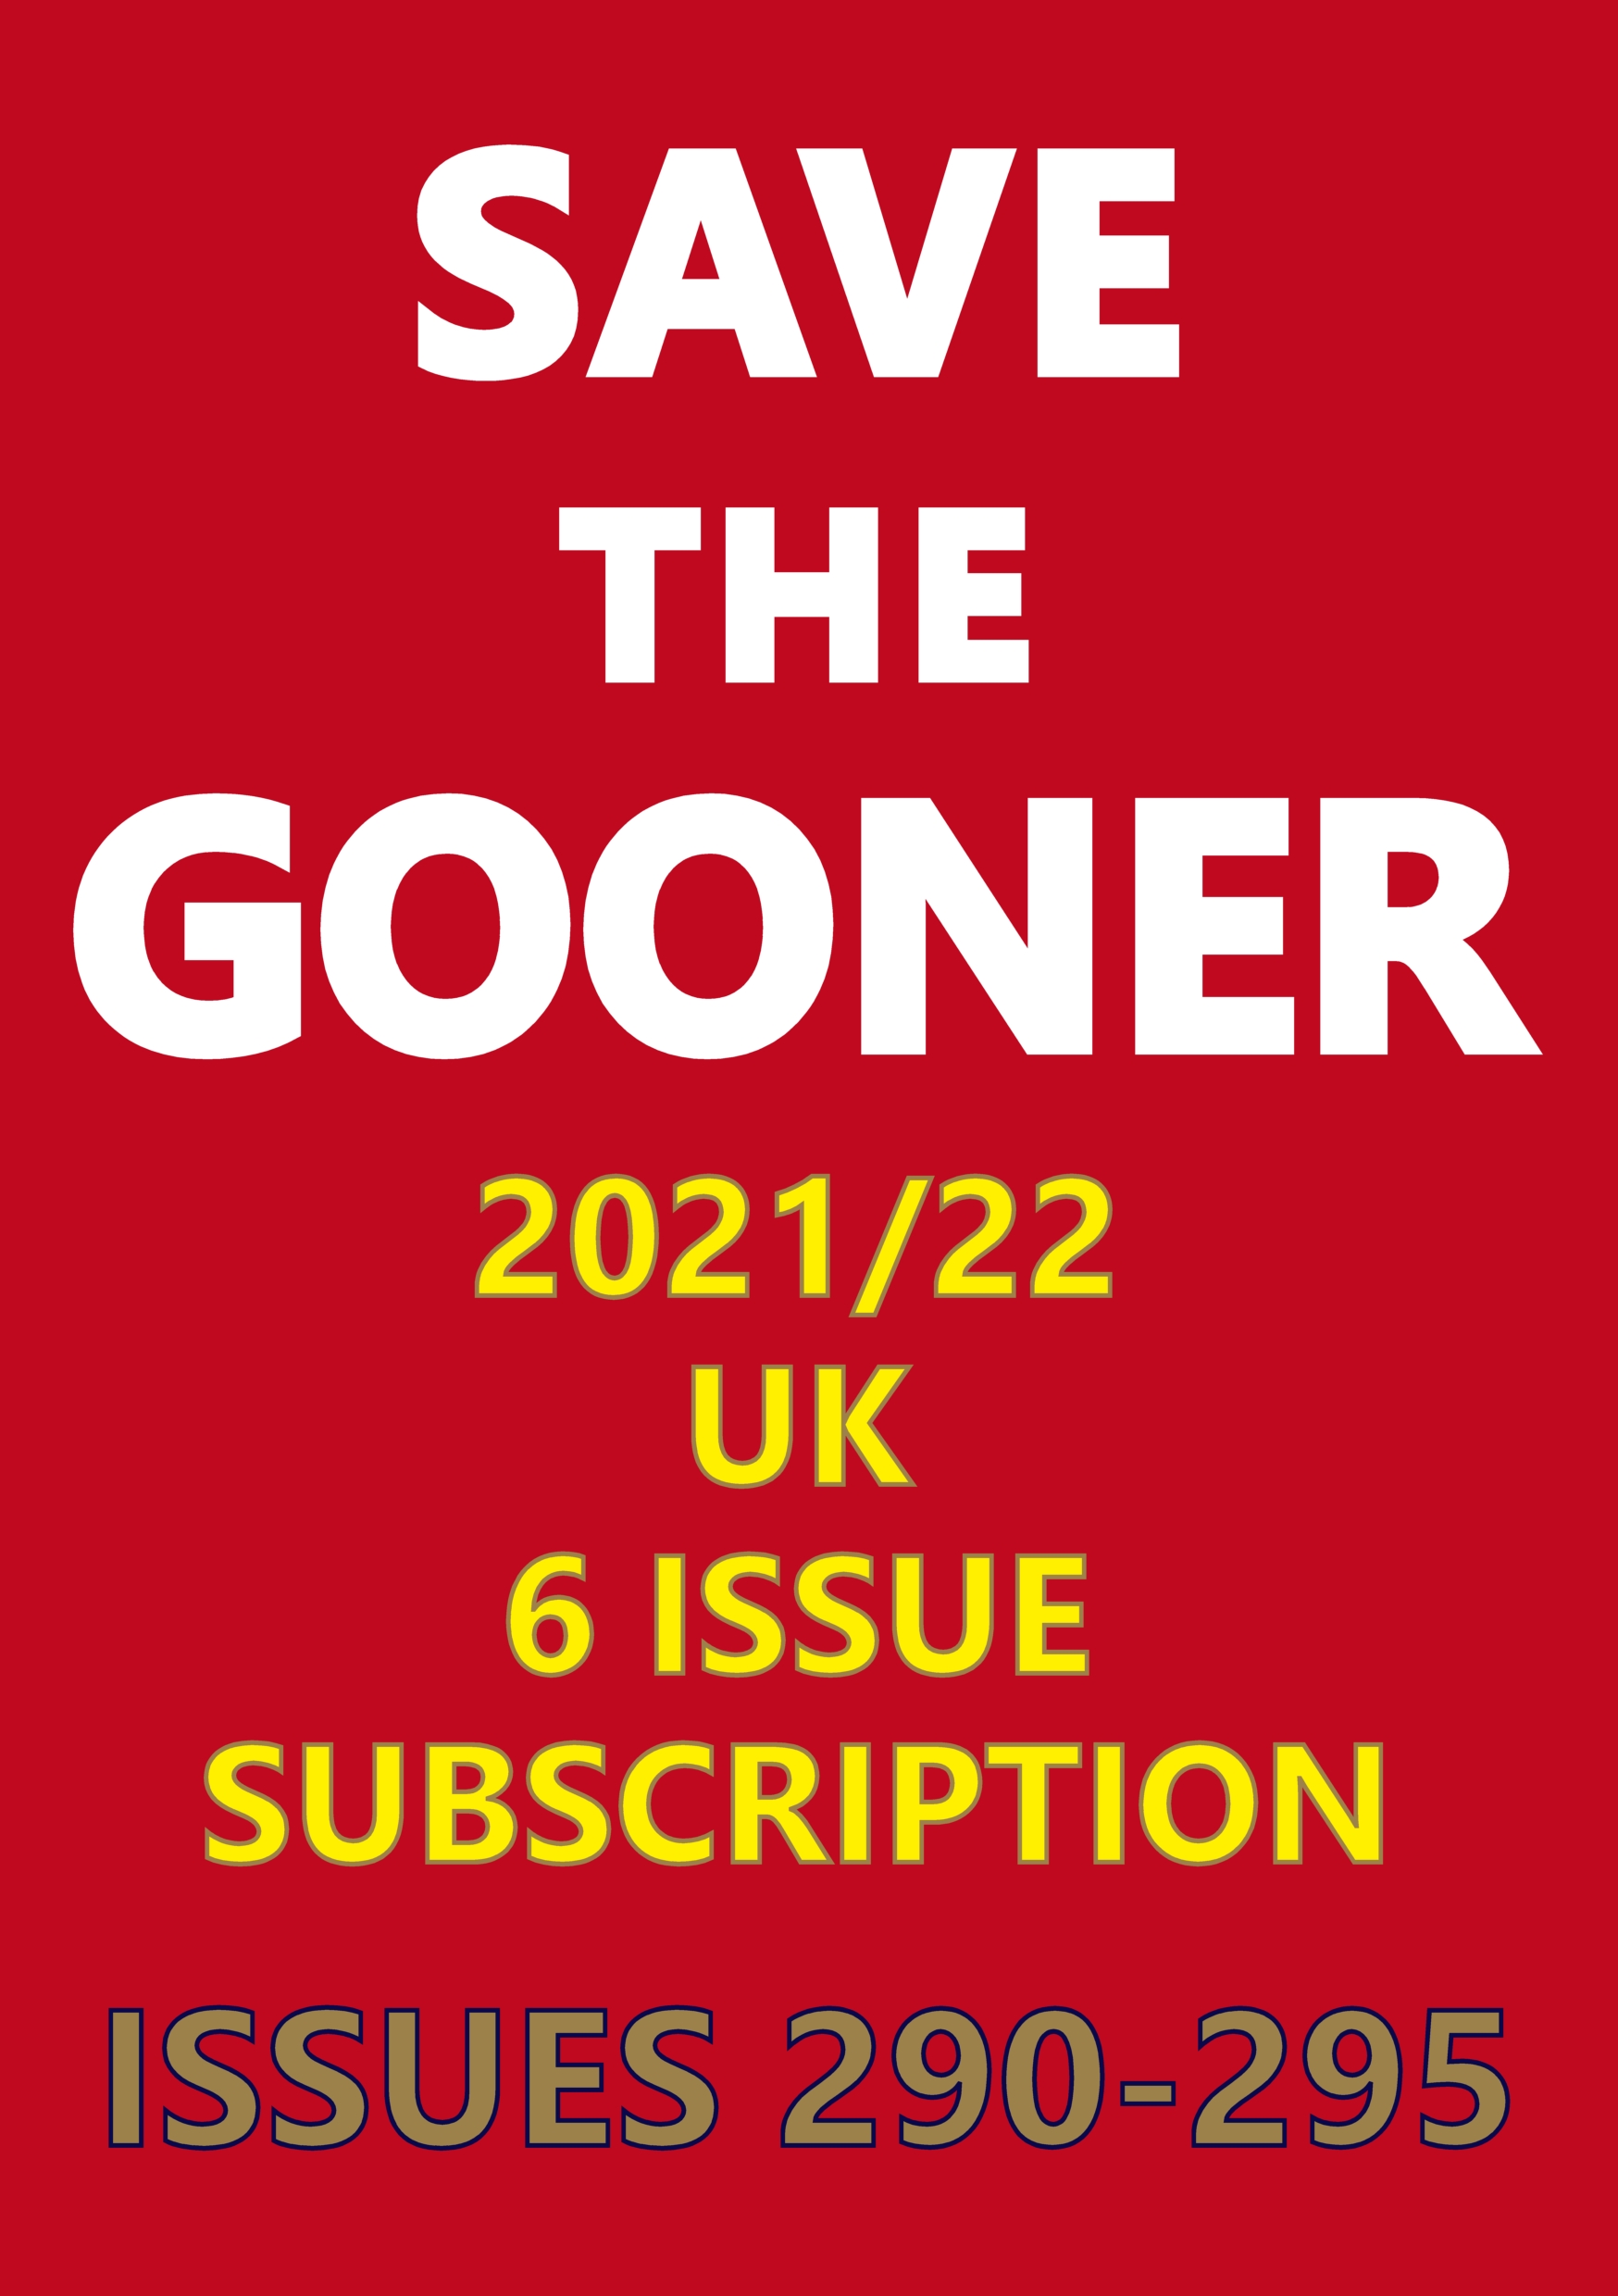 Save The Gooner 2022/23 subscription (UK 1 Year)